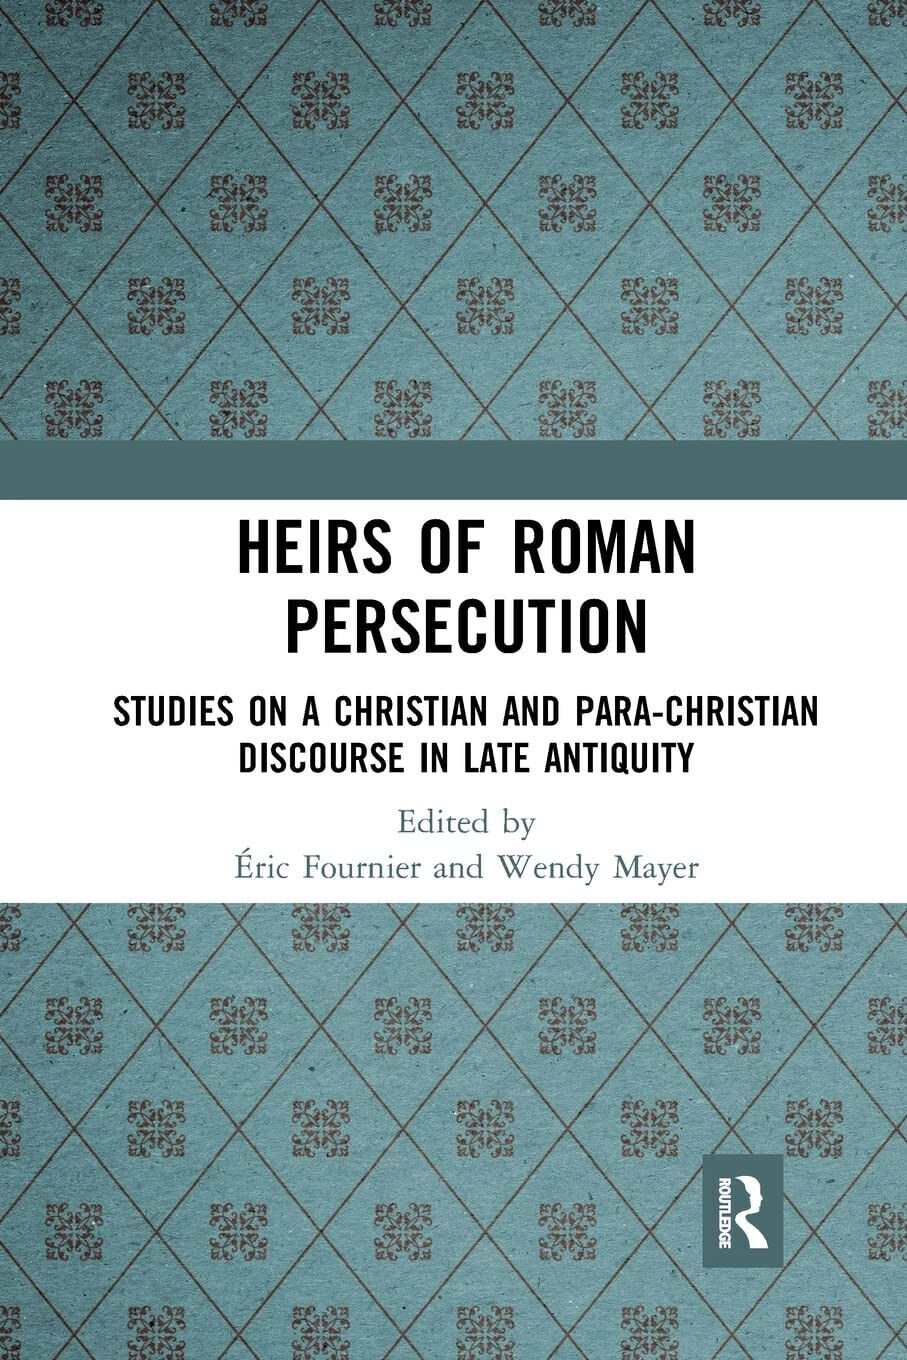 Heirs Of Roman Persecution - Eric Fournier, Wendy Mayer - Routledge, 2021